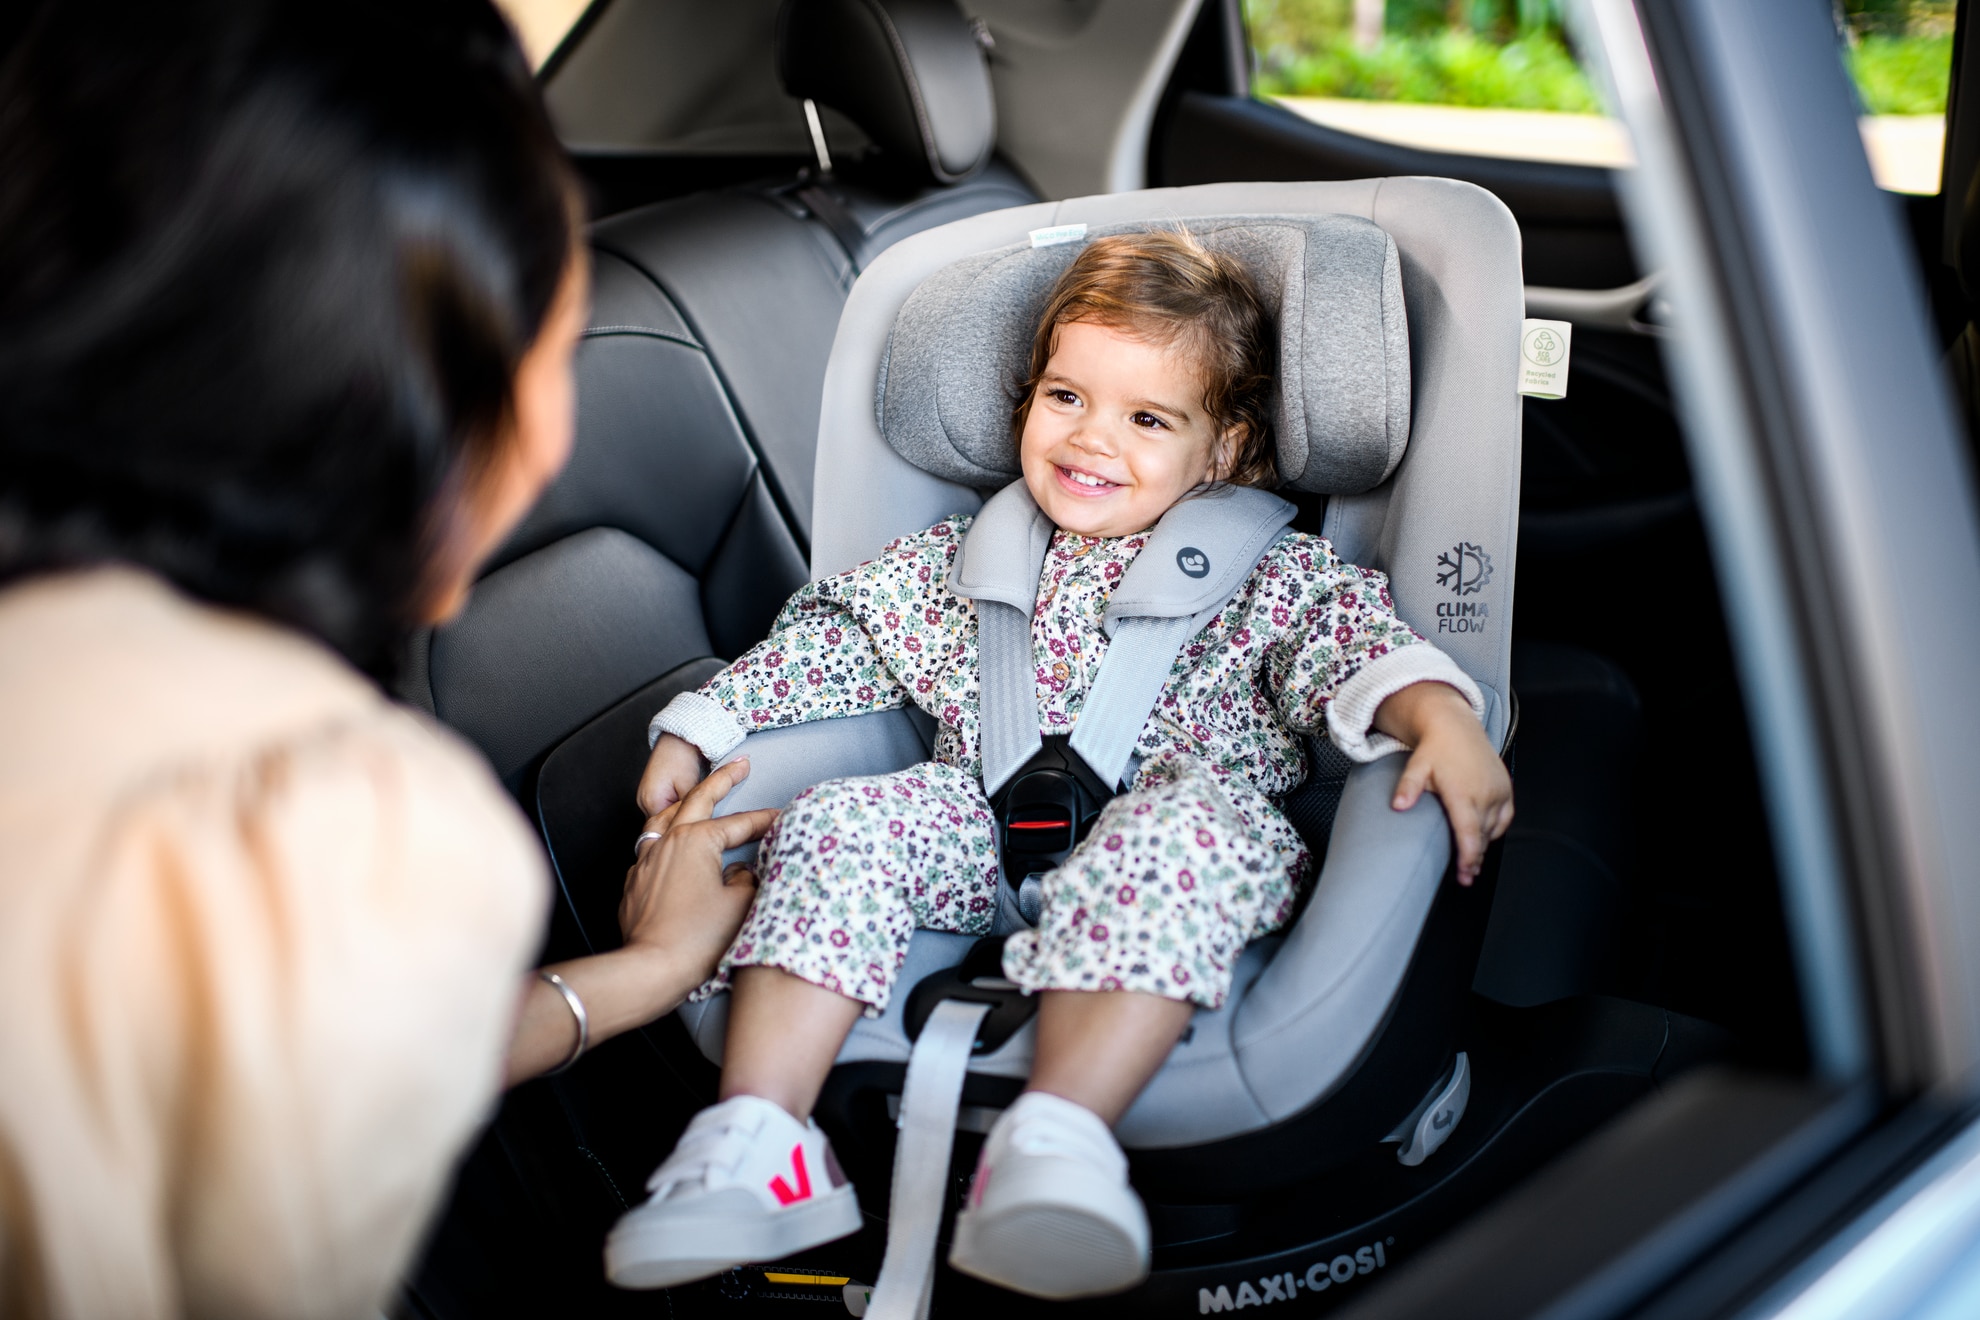 How to Clean a Child's Car Seat